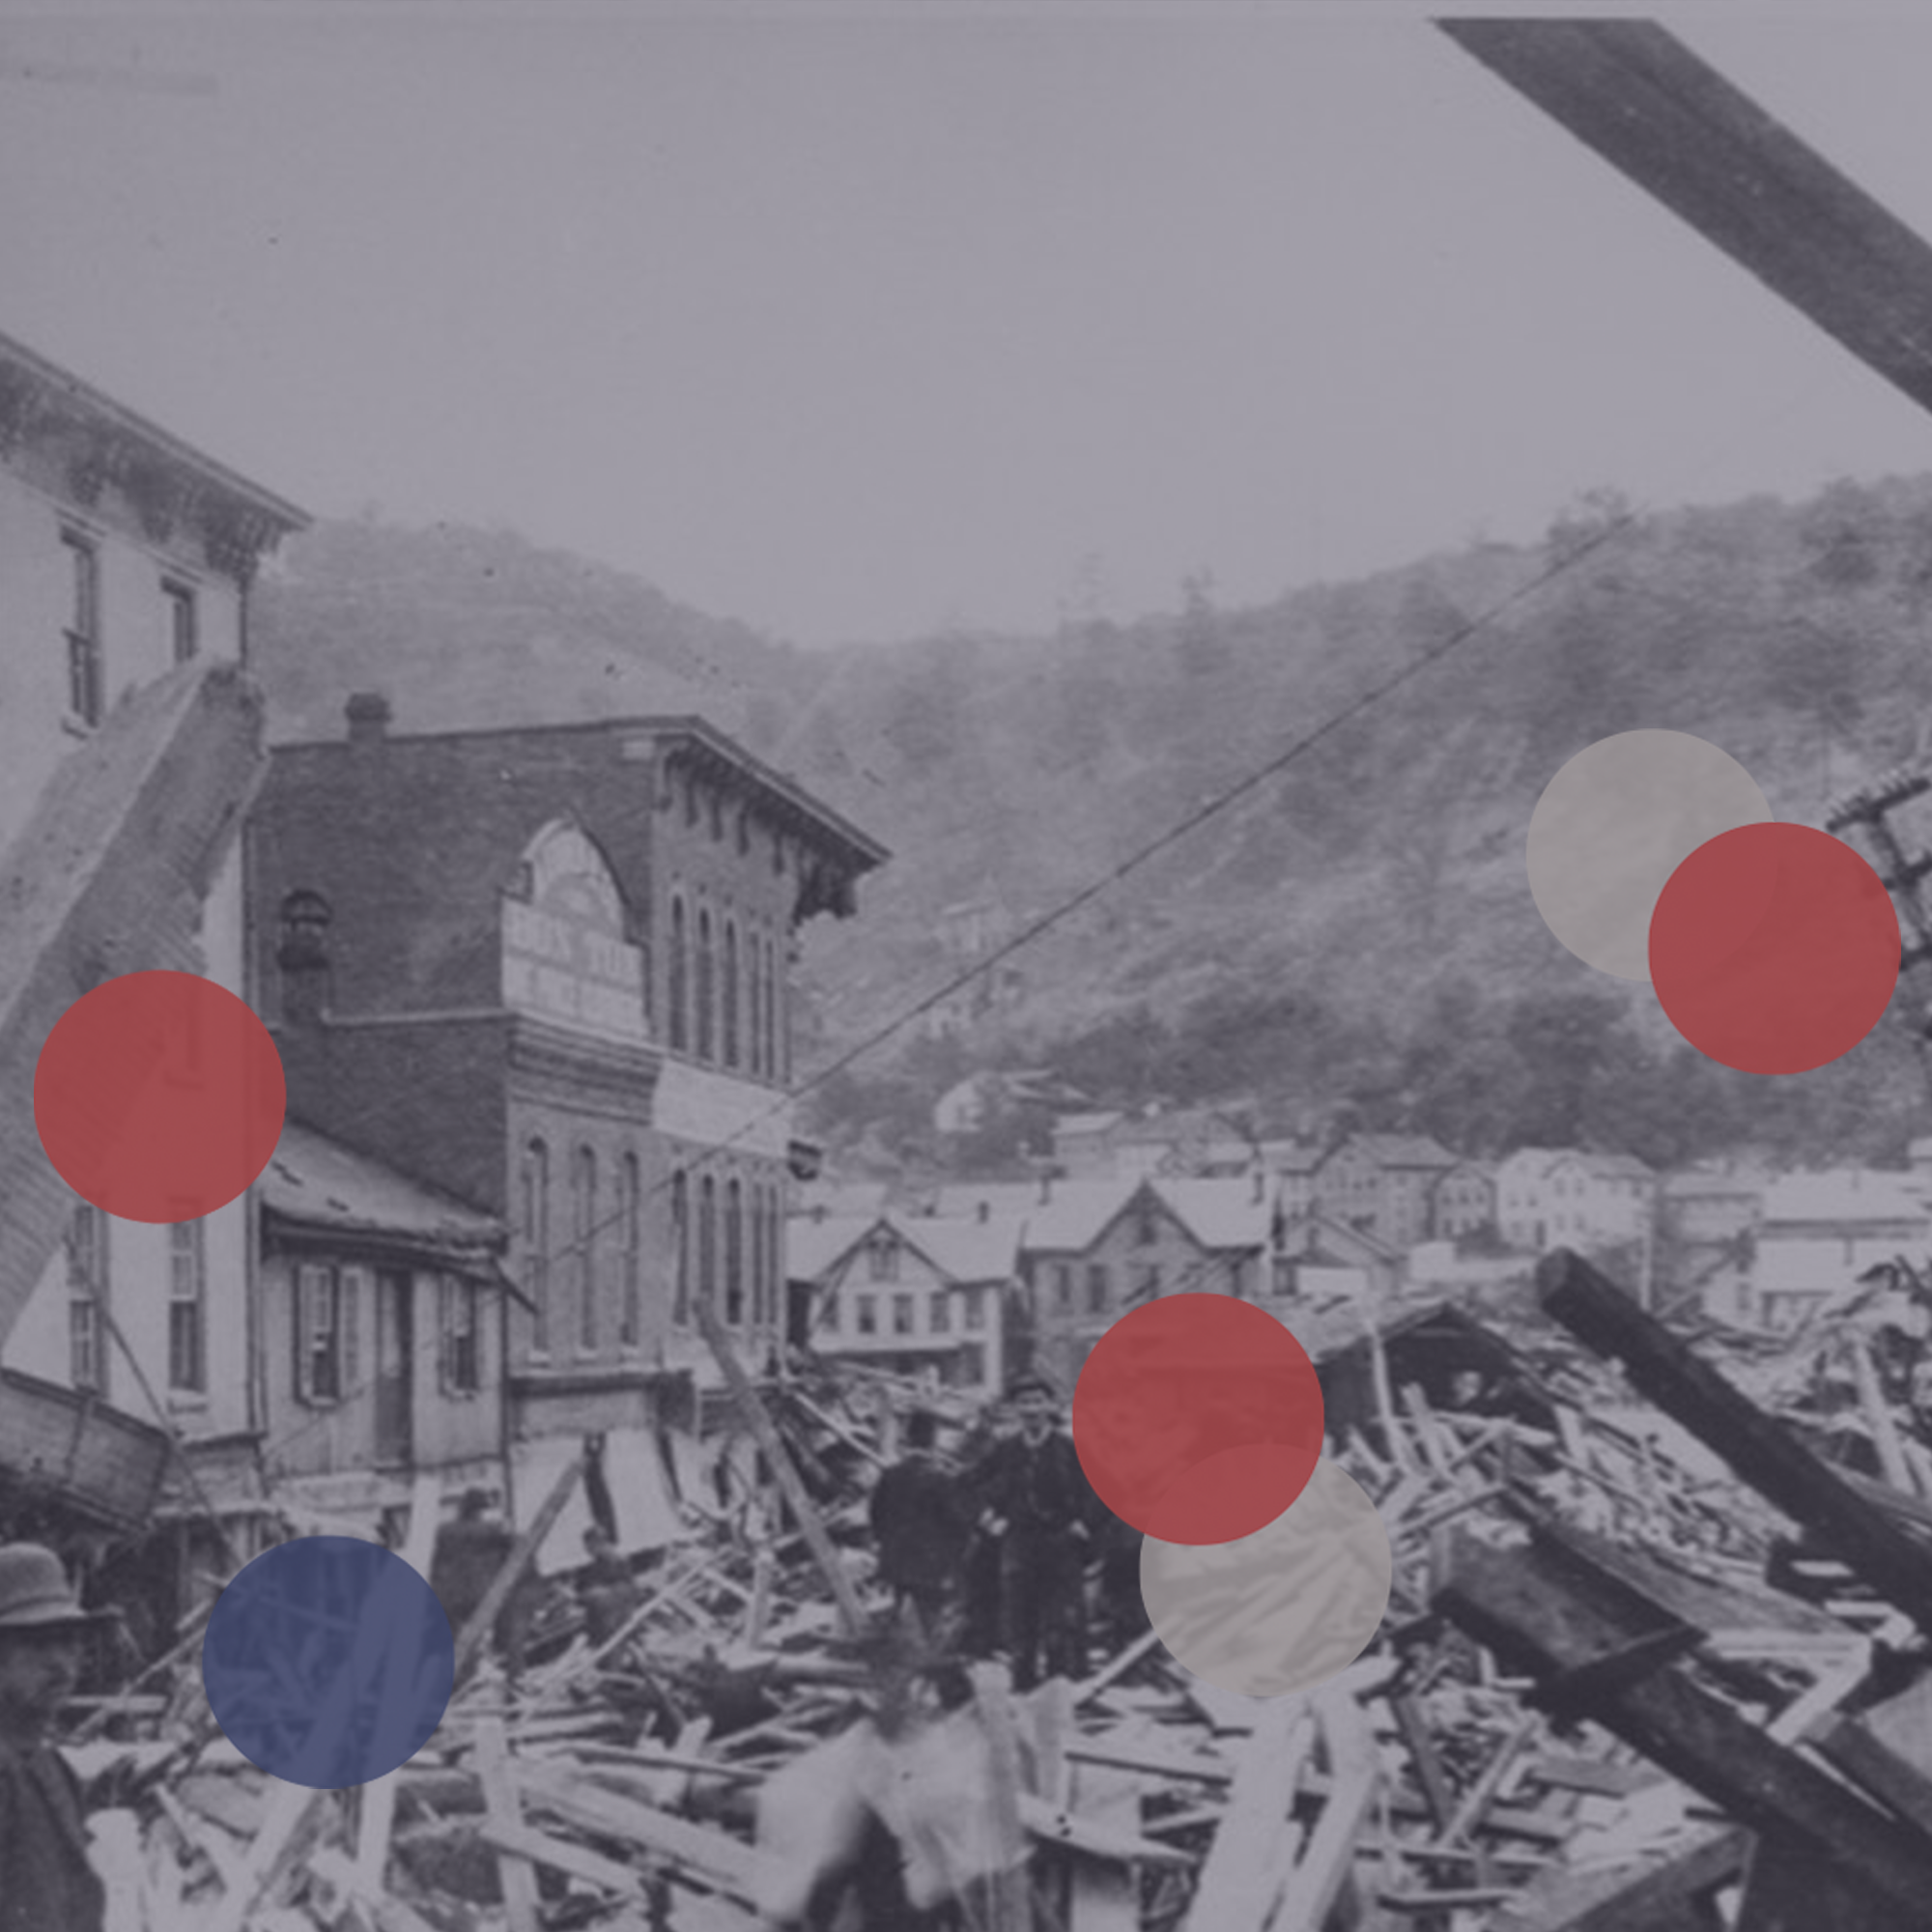 The Night Of The Johnstown Flood (1889)